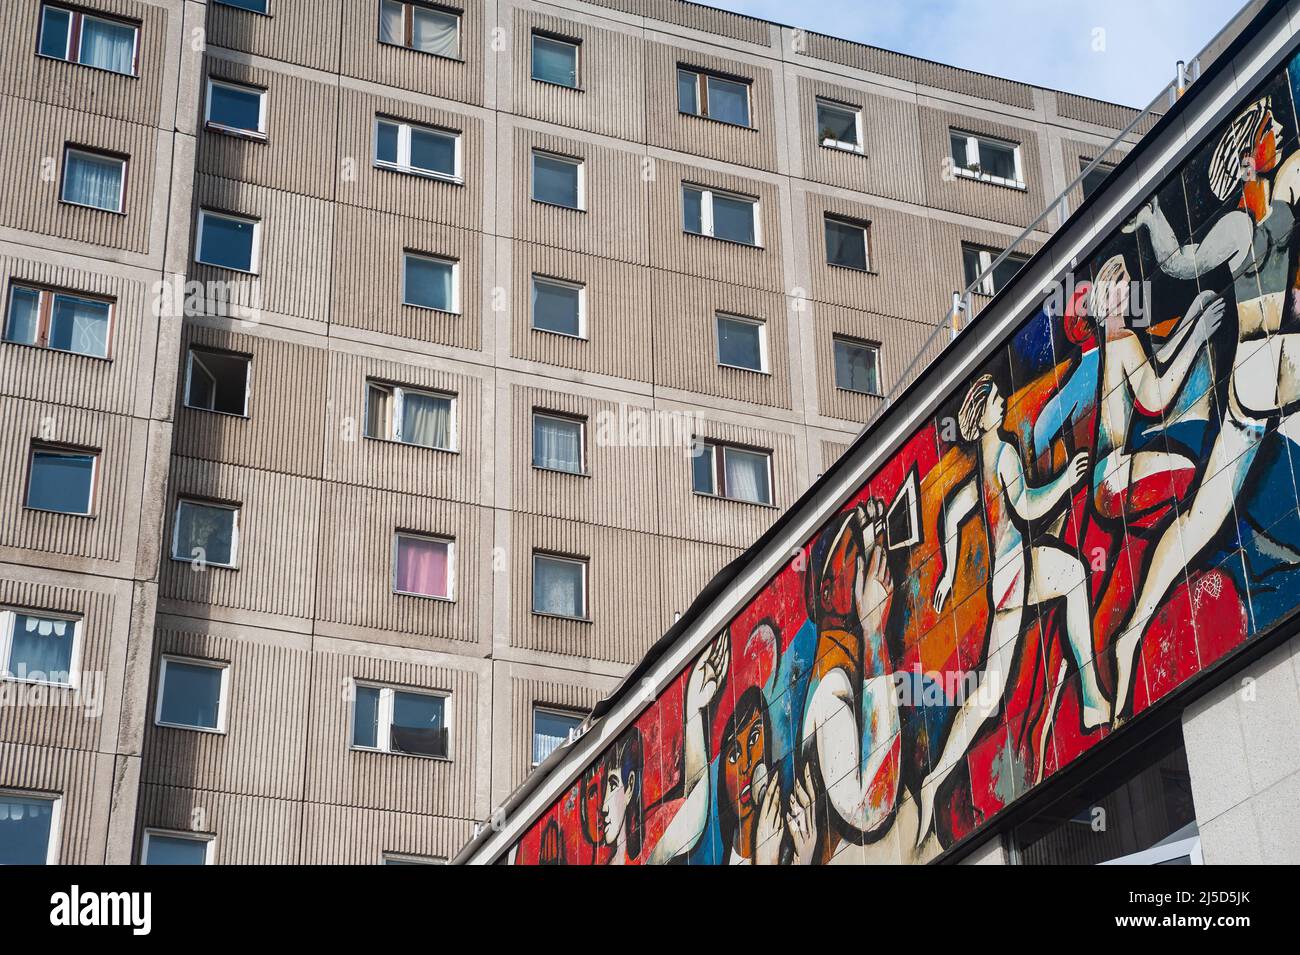 05.02.2022, Berlin, Germany, Europe - GDR frieze (wall mosaic) with the title The press as an organizer at the former Pressecafe Berlin flat building at Alexanderplatz by the painter Willi Neubert. Adjacent to it a typical prefabricated building with apartments. [automated translation] Stock Photo